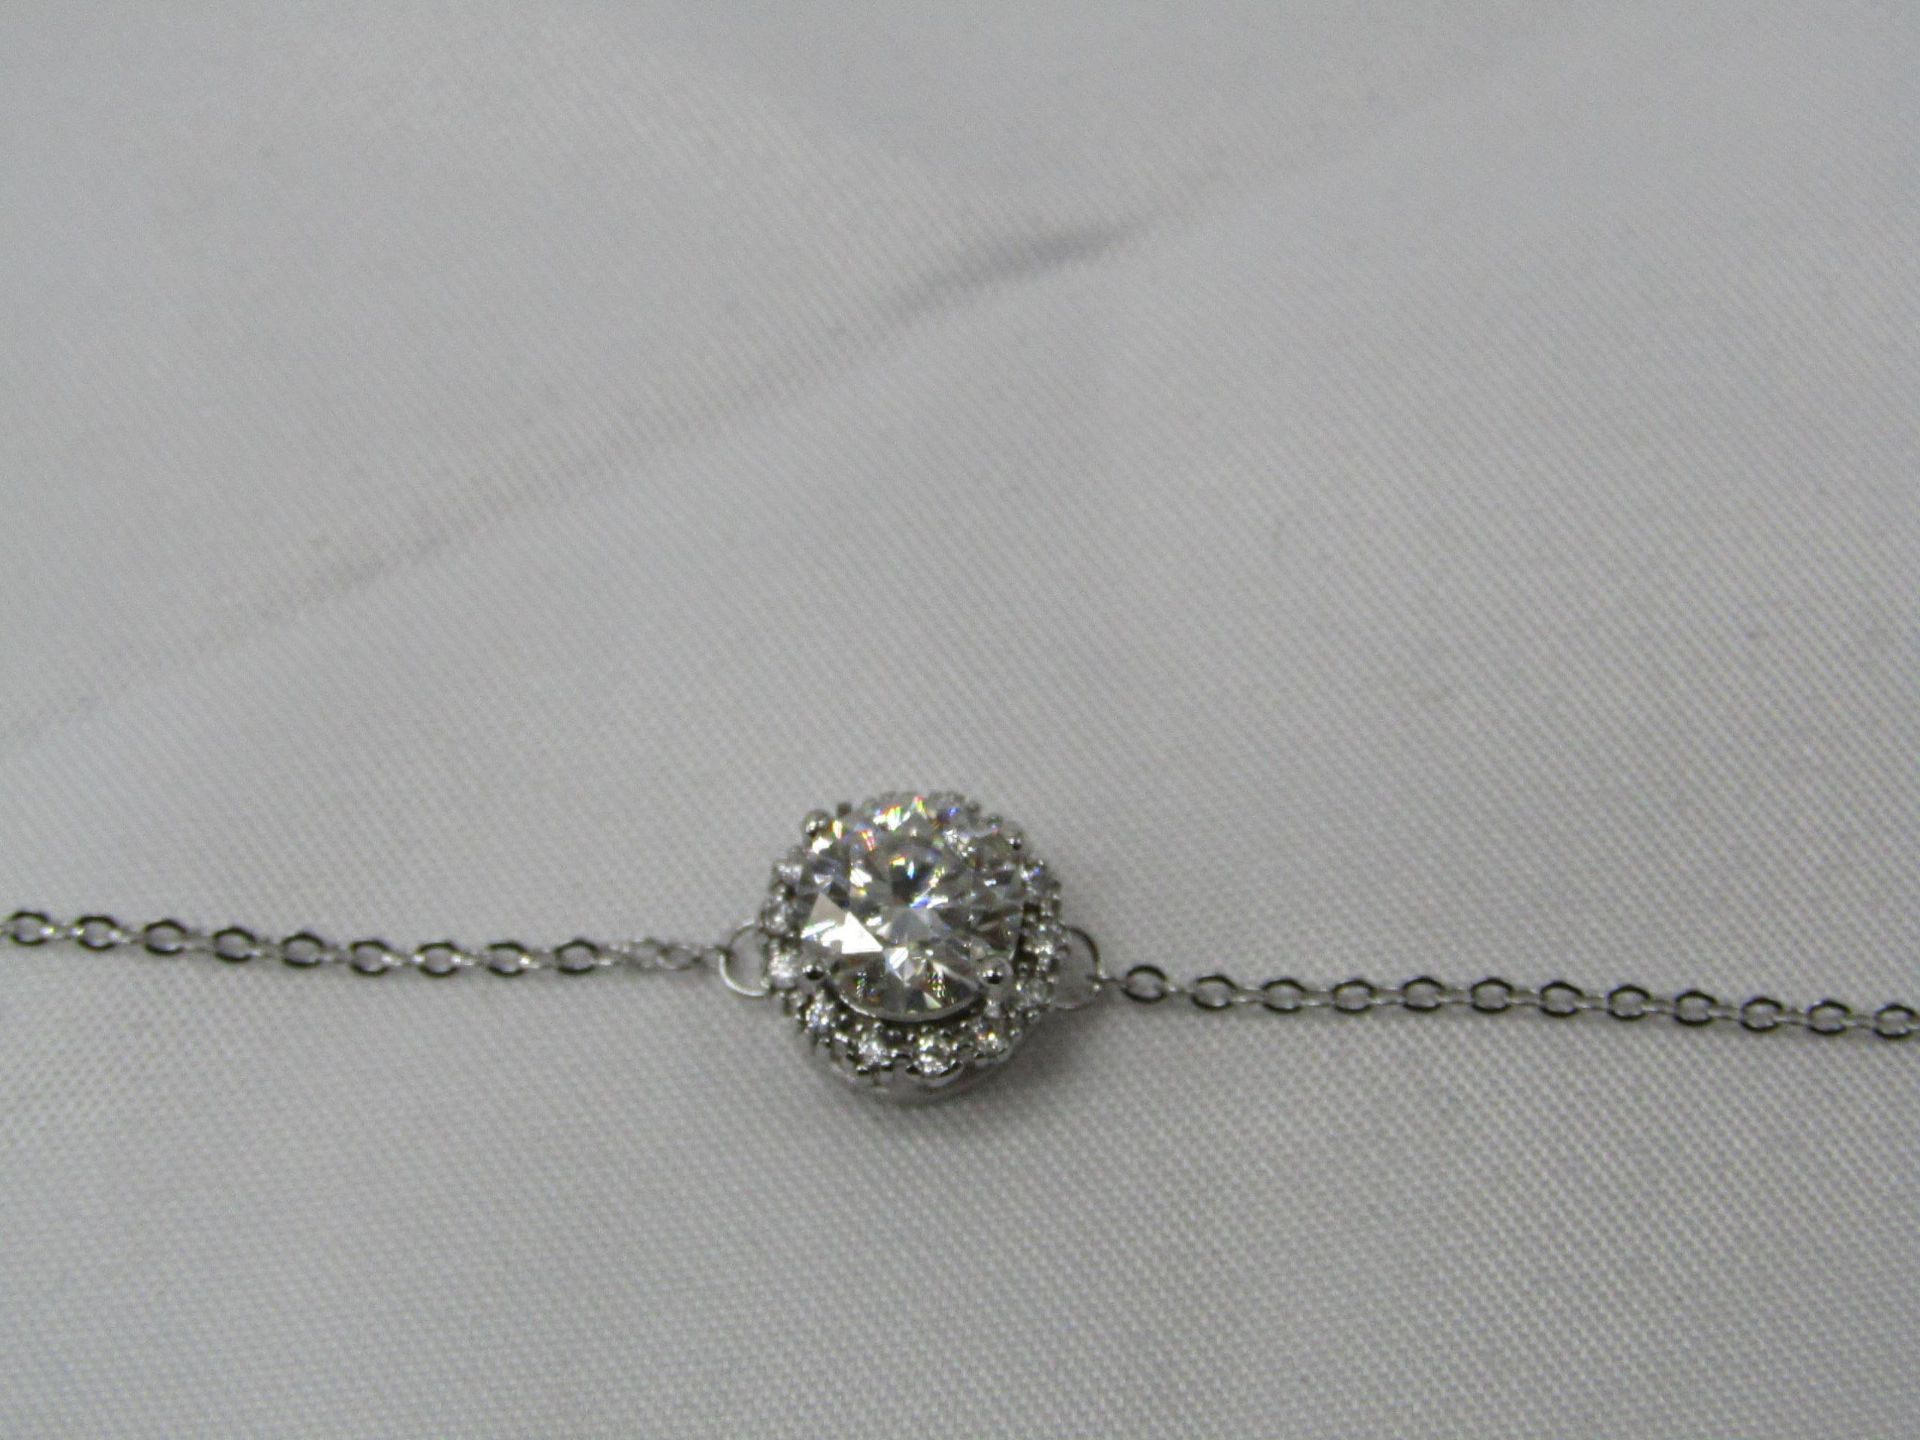 1 Carat Round Brilliant Cut Moissanite stone in a 925 Silver setting and Bracelet, new and comes